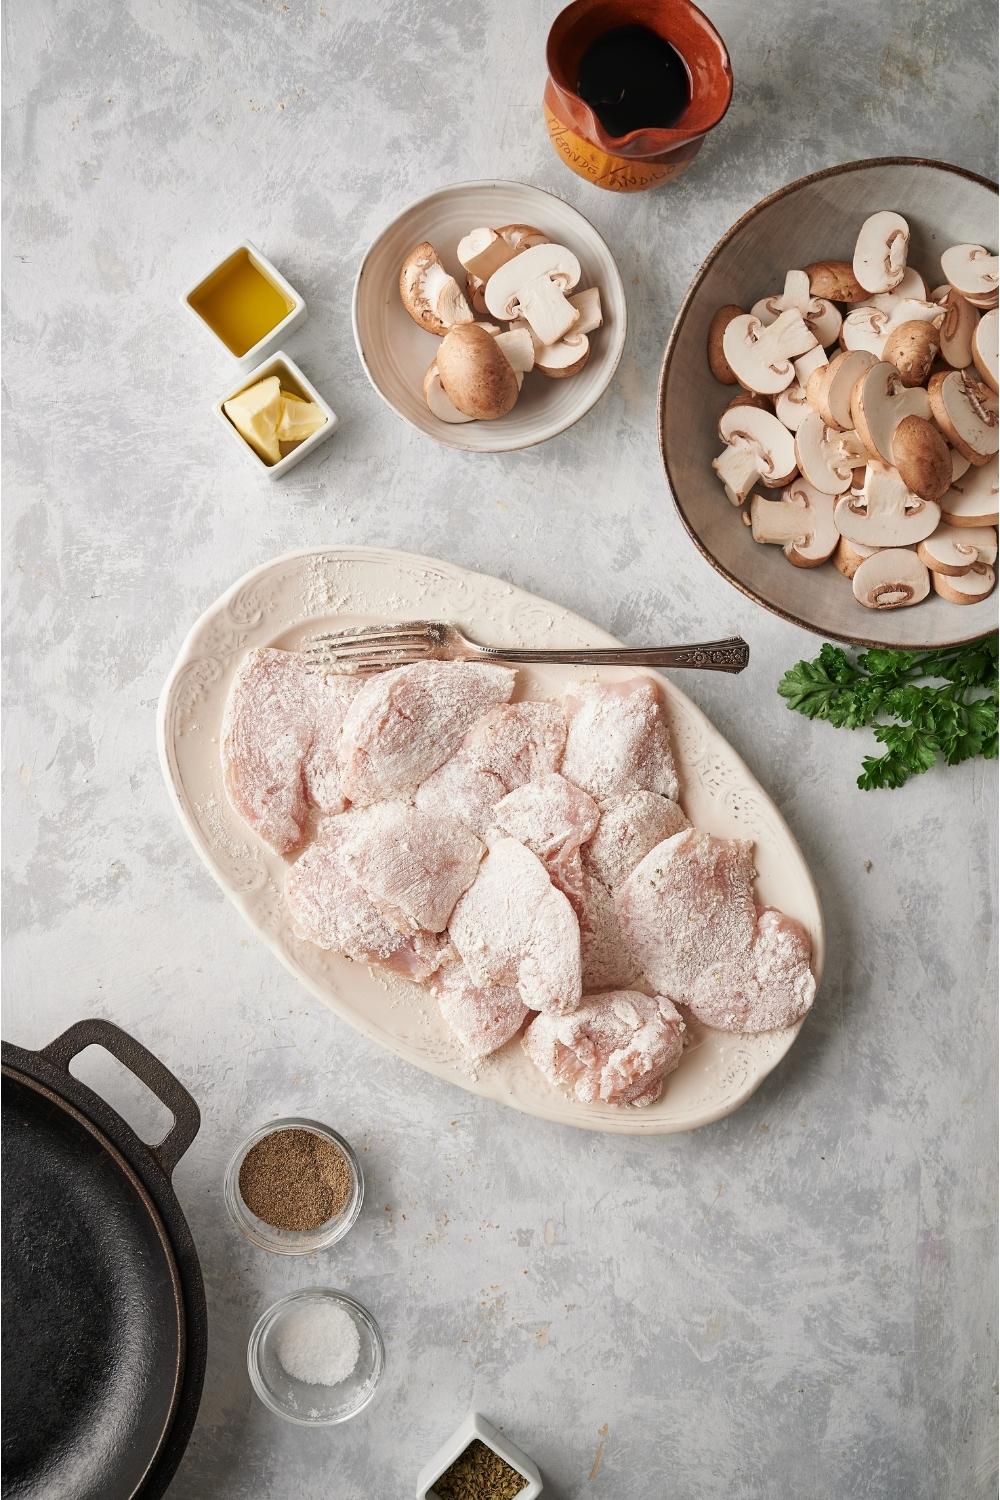 Raw chicken covered in a flour mixture on a white plate with a fork on the plate and small bowls of sliced mushrooms, salt, pepper, butter, oil, and marsala wine.